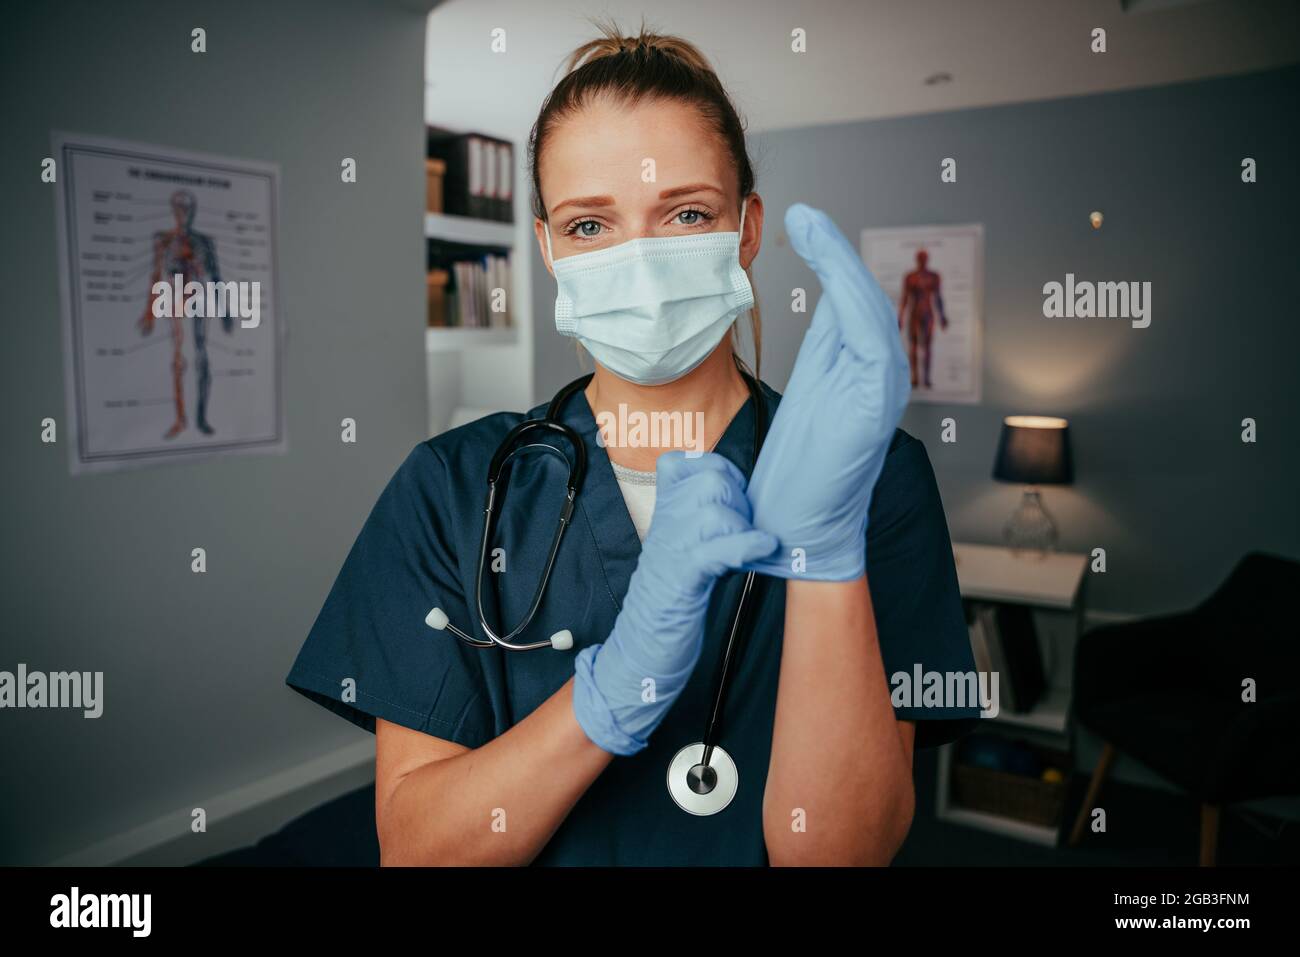 Caucasian female nurse standing in doctors office wearing surgical gear Stock Photo